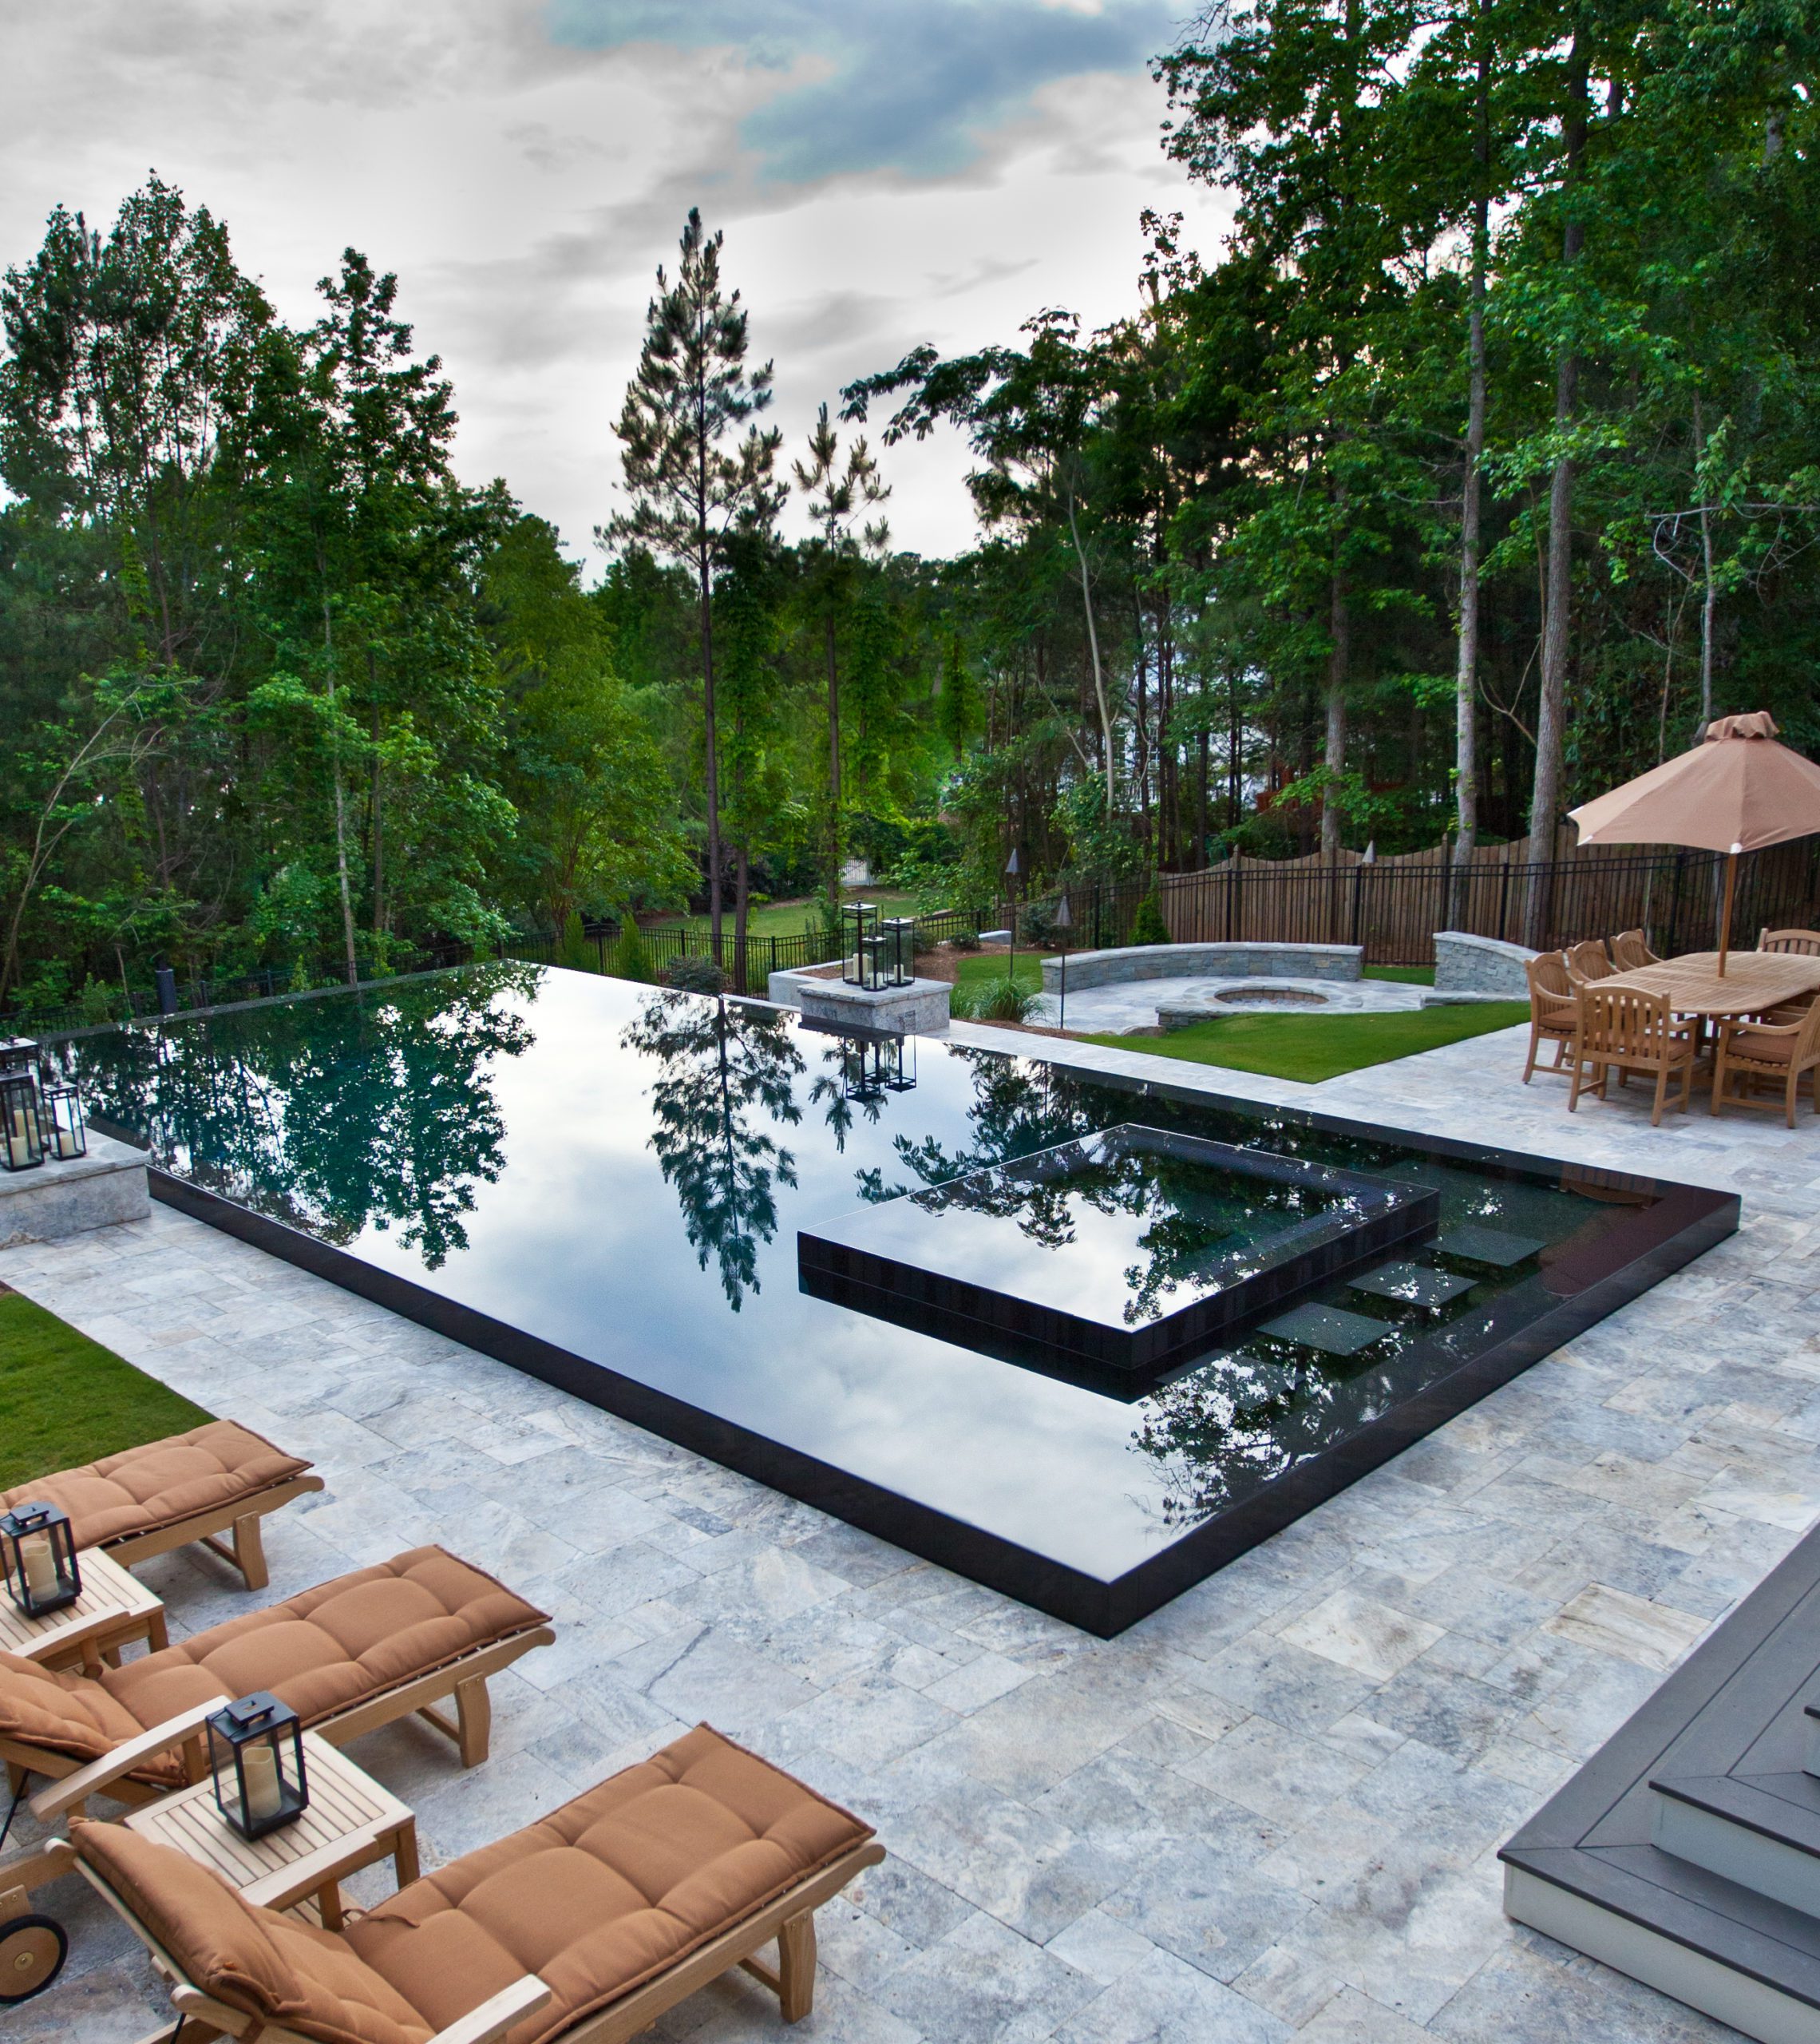 How Does an Infinity-Edge Pool Work? - Green Scene Landscaping & Pools